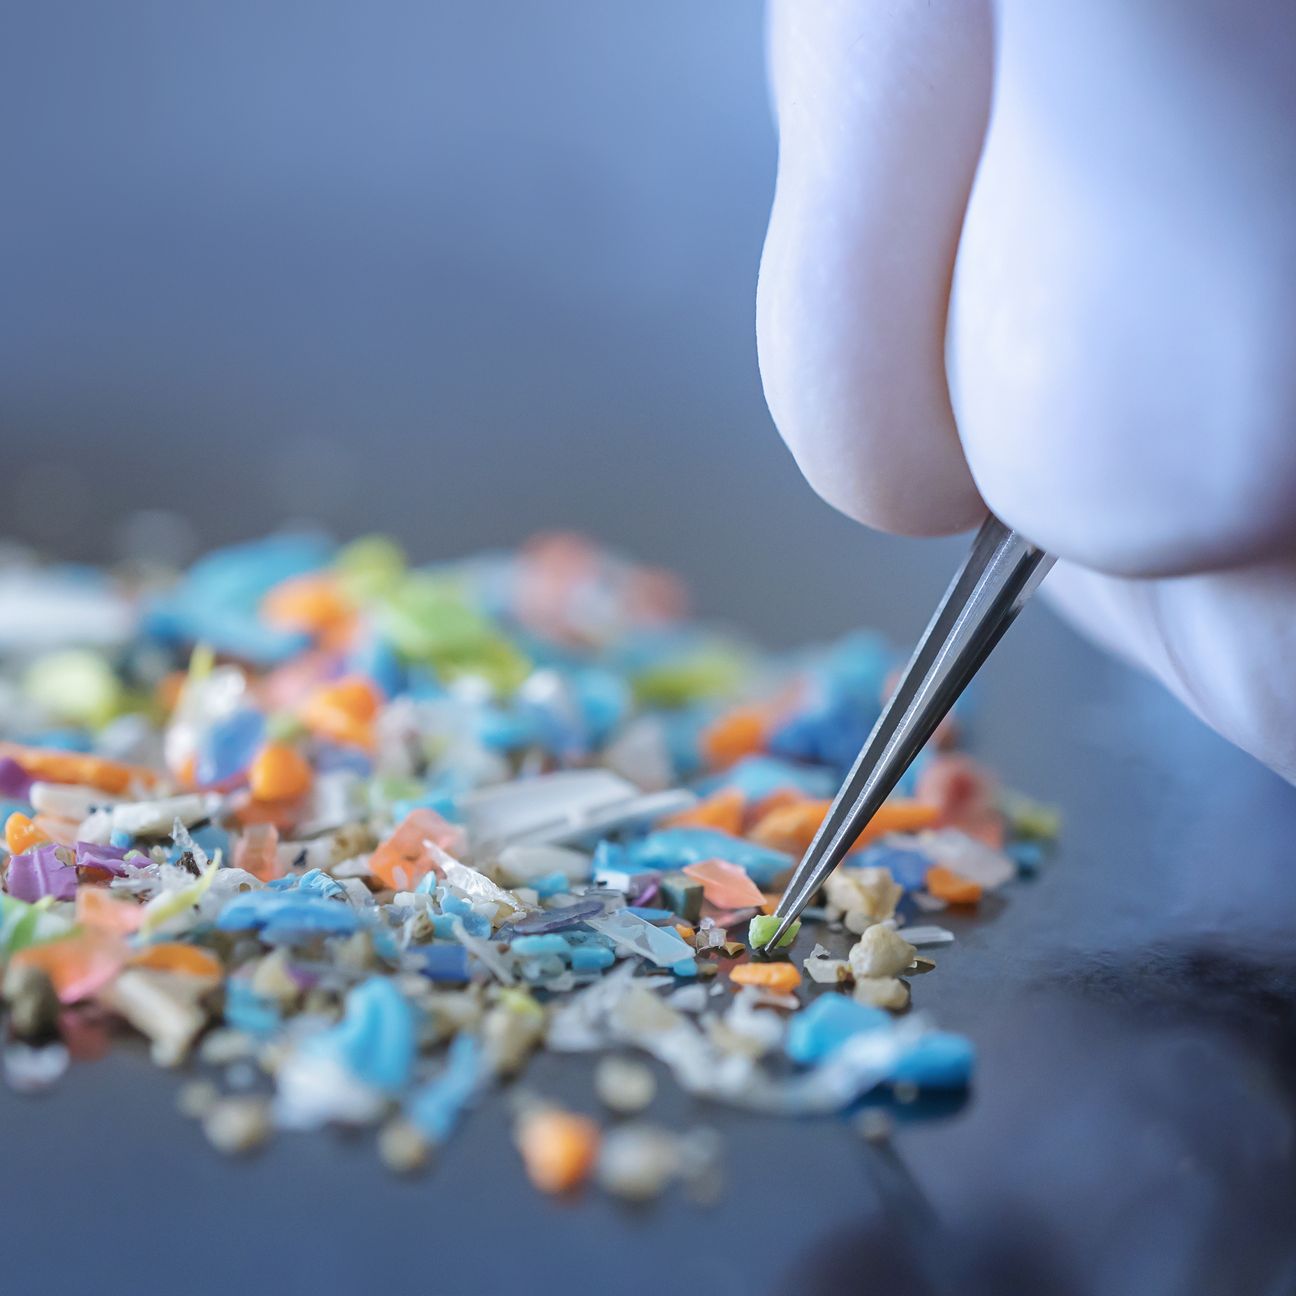 A Study Found Microplastics in Every Single Human Placenta Tested